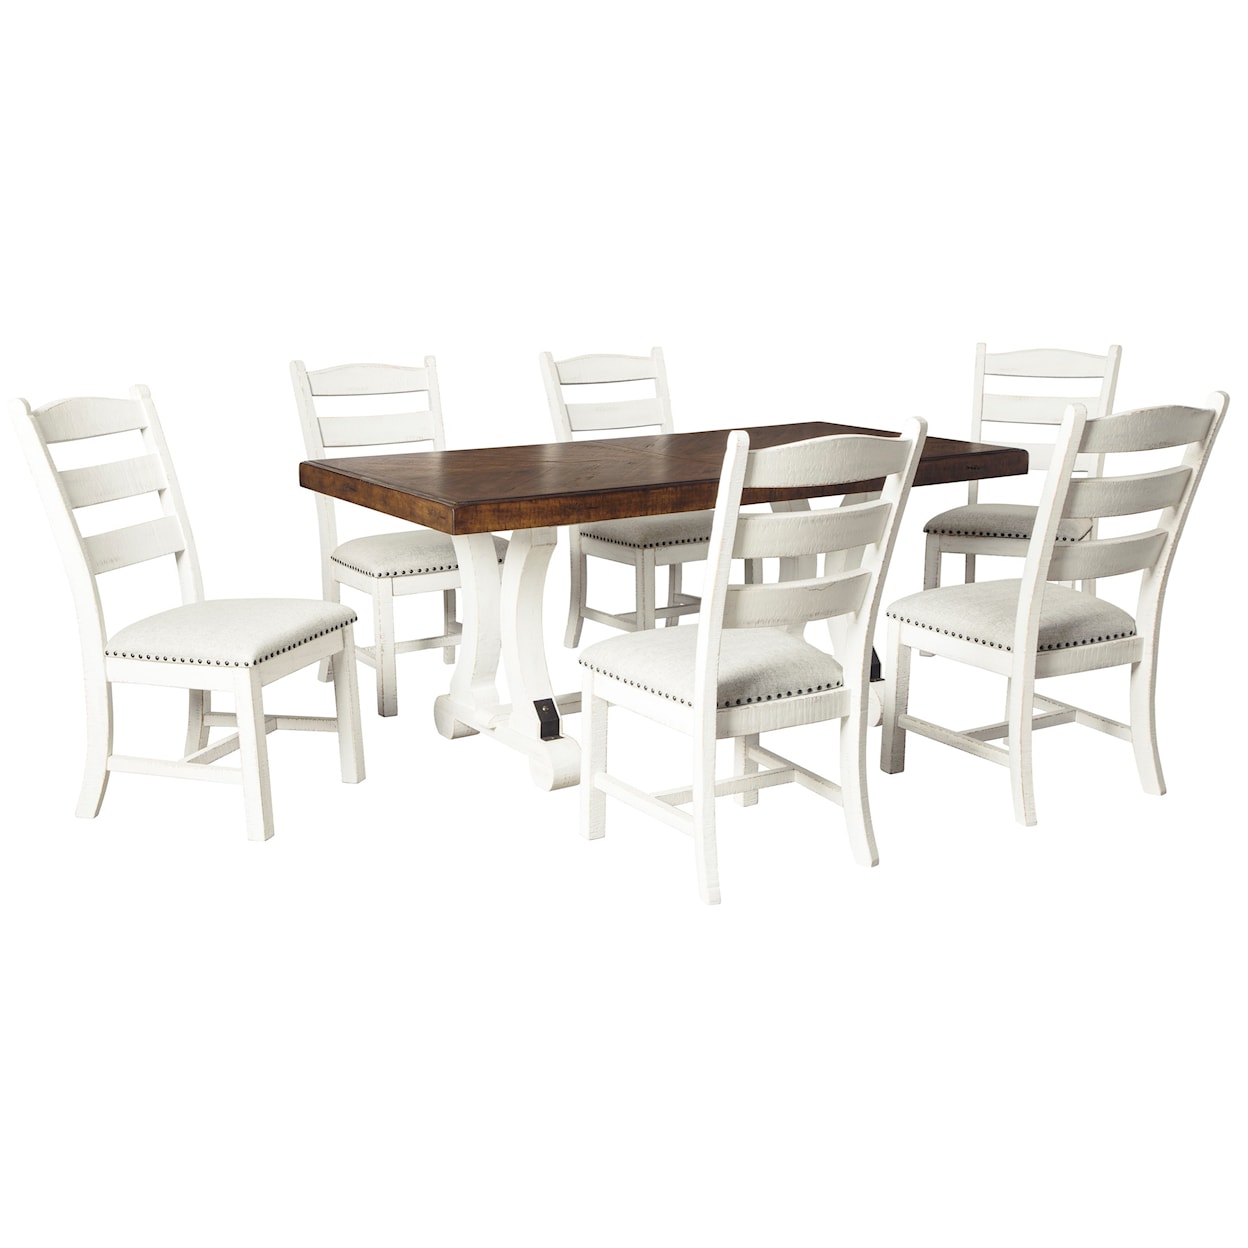 Benchcraft Valebeck 7-Piece Table and Chair Set